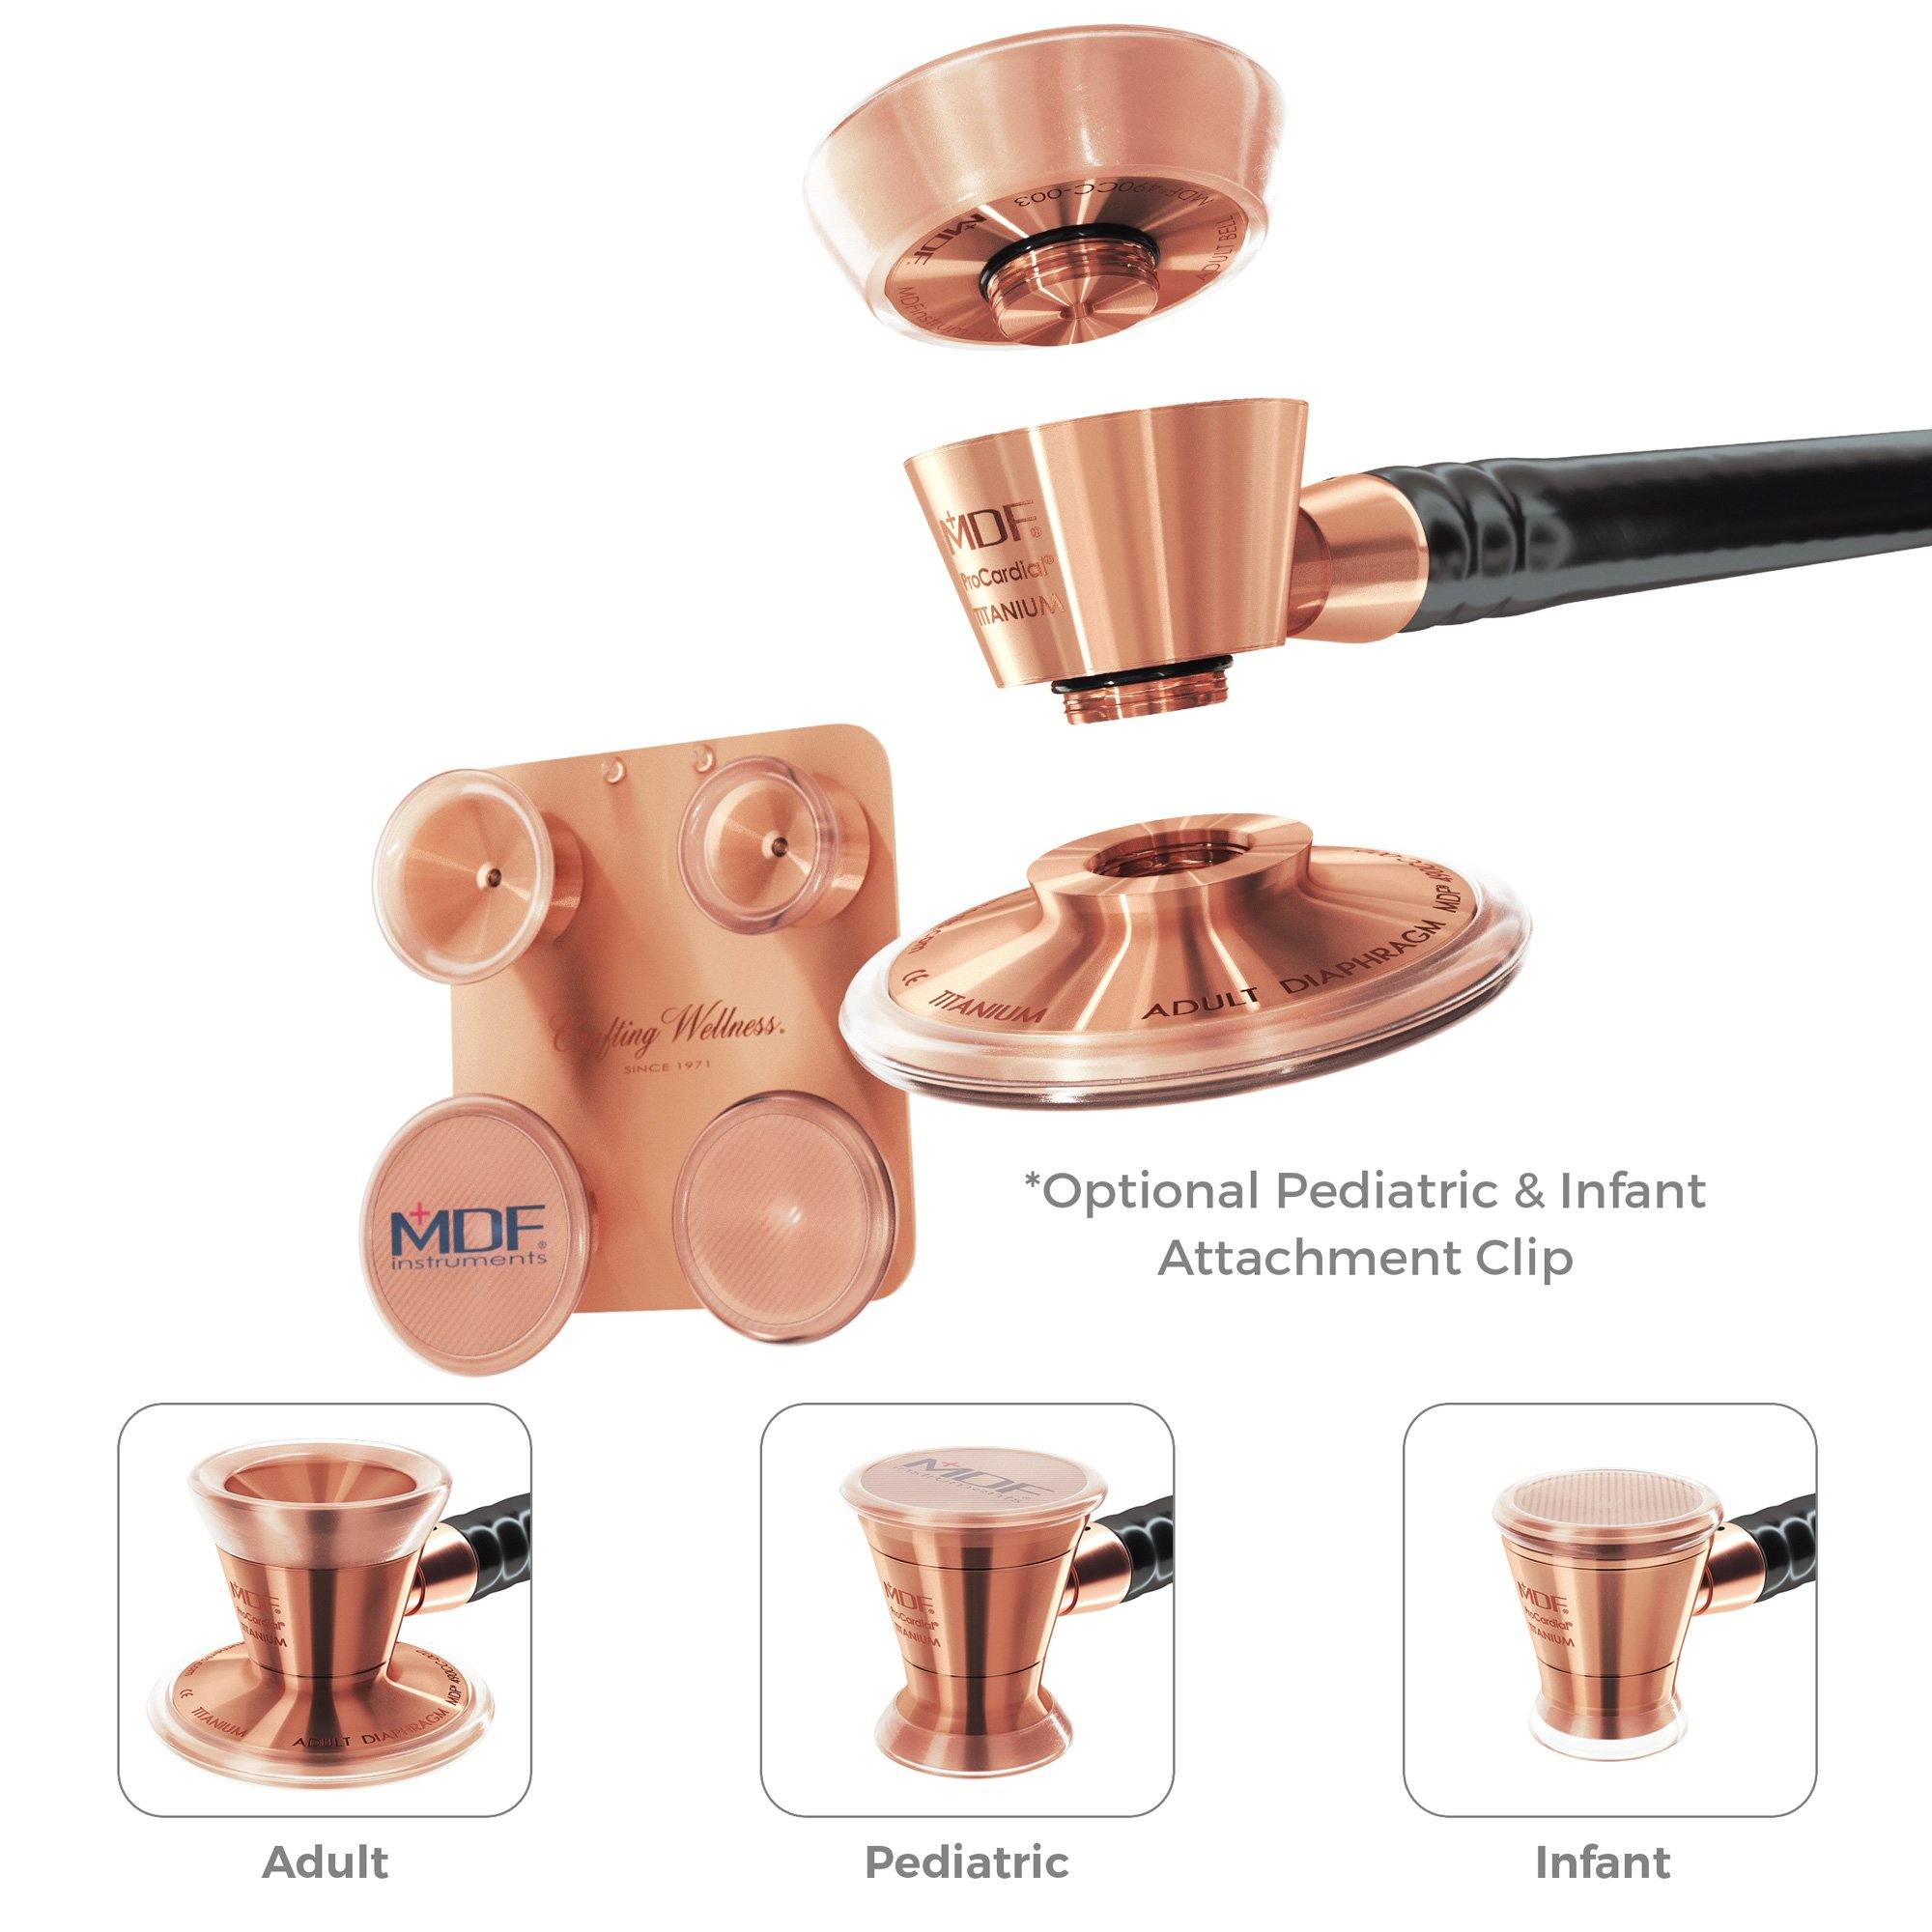 Stethoscope Attachments for Pediatric and Infant Neonatal Patients with Clip MDF® ProCardial® Titanium Rose Gold